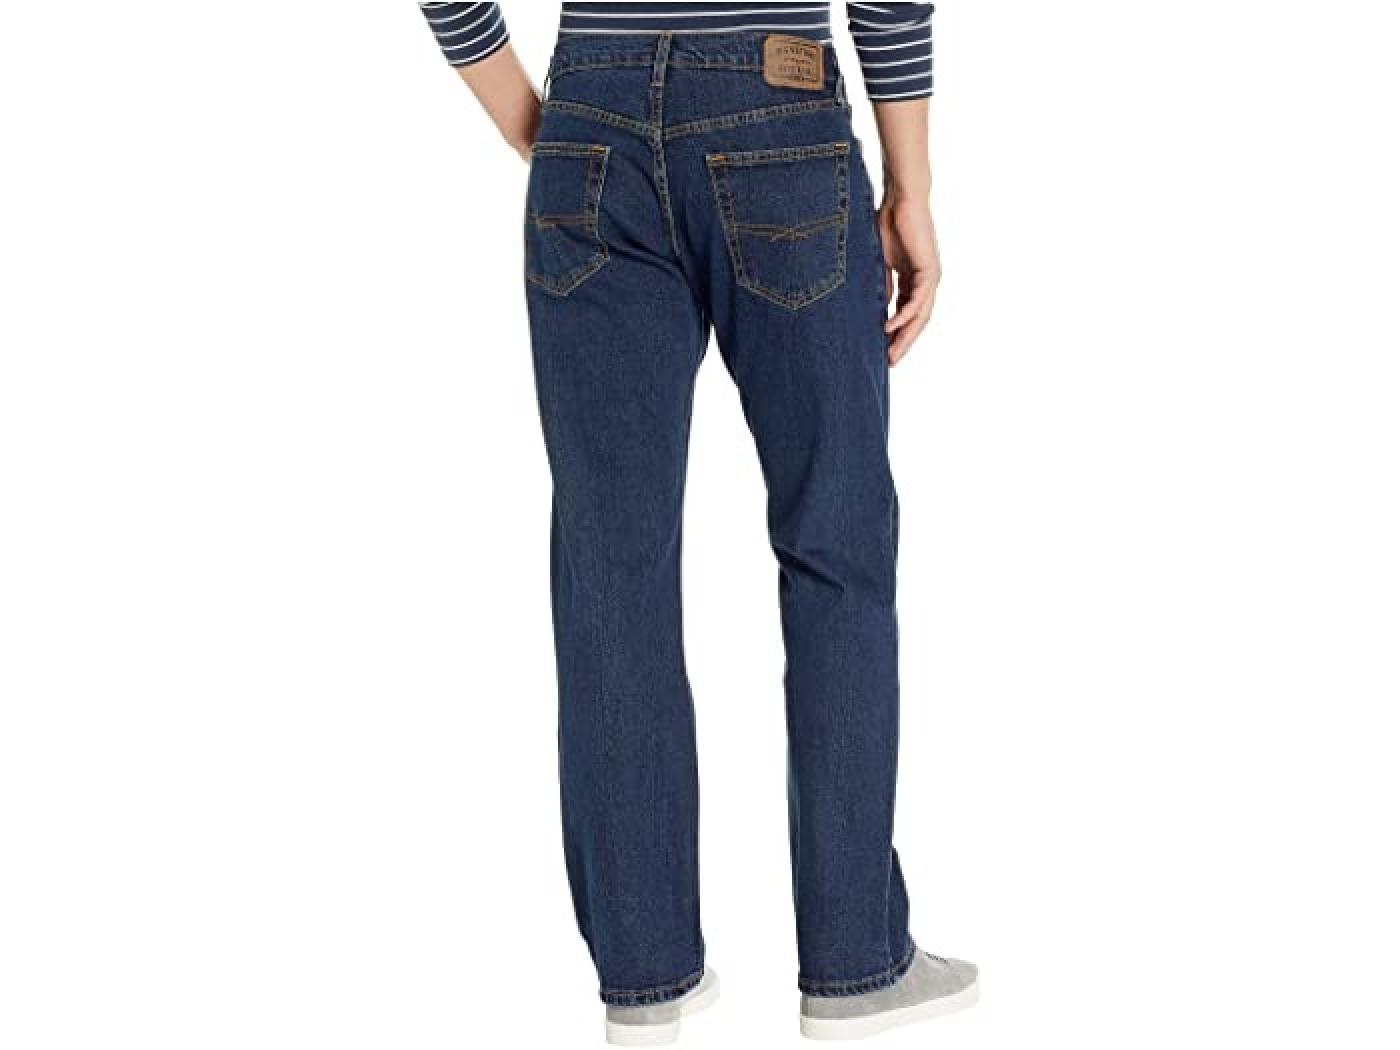 Signature by Levi Strauss & Co. Men's Relaxed Jeans